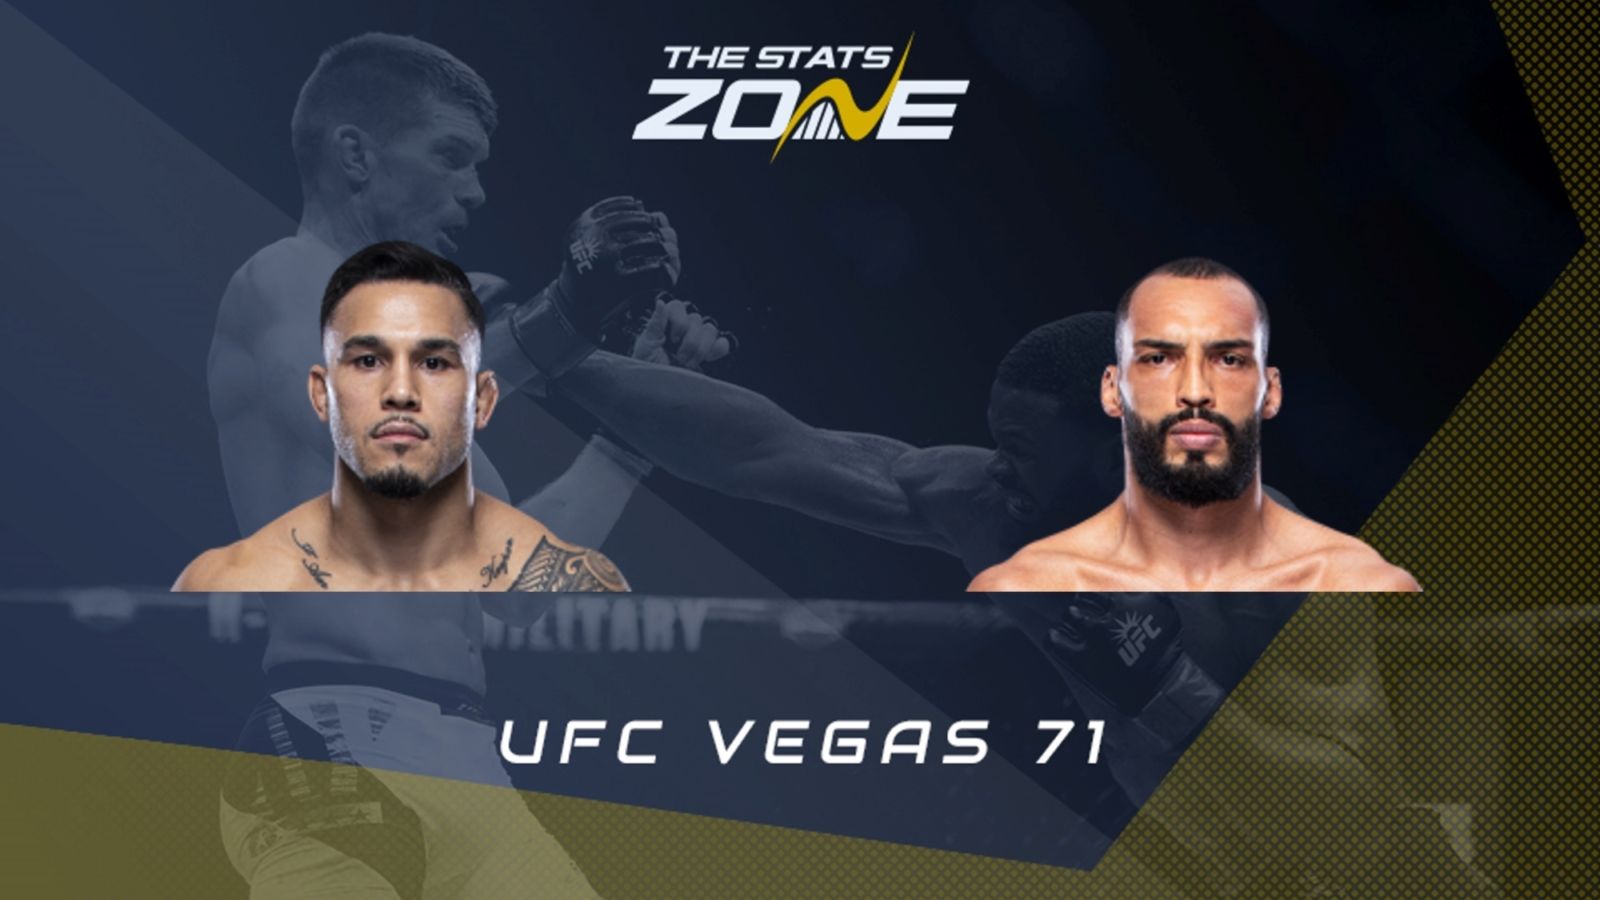 Brad Tavares vs Bruno Silva: Preview, Where to Watch and Betting Odds